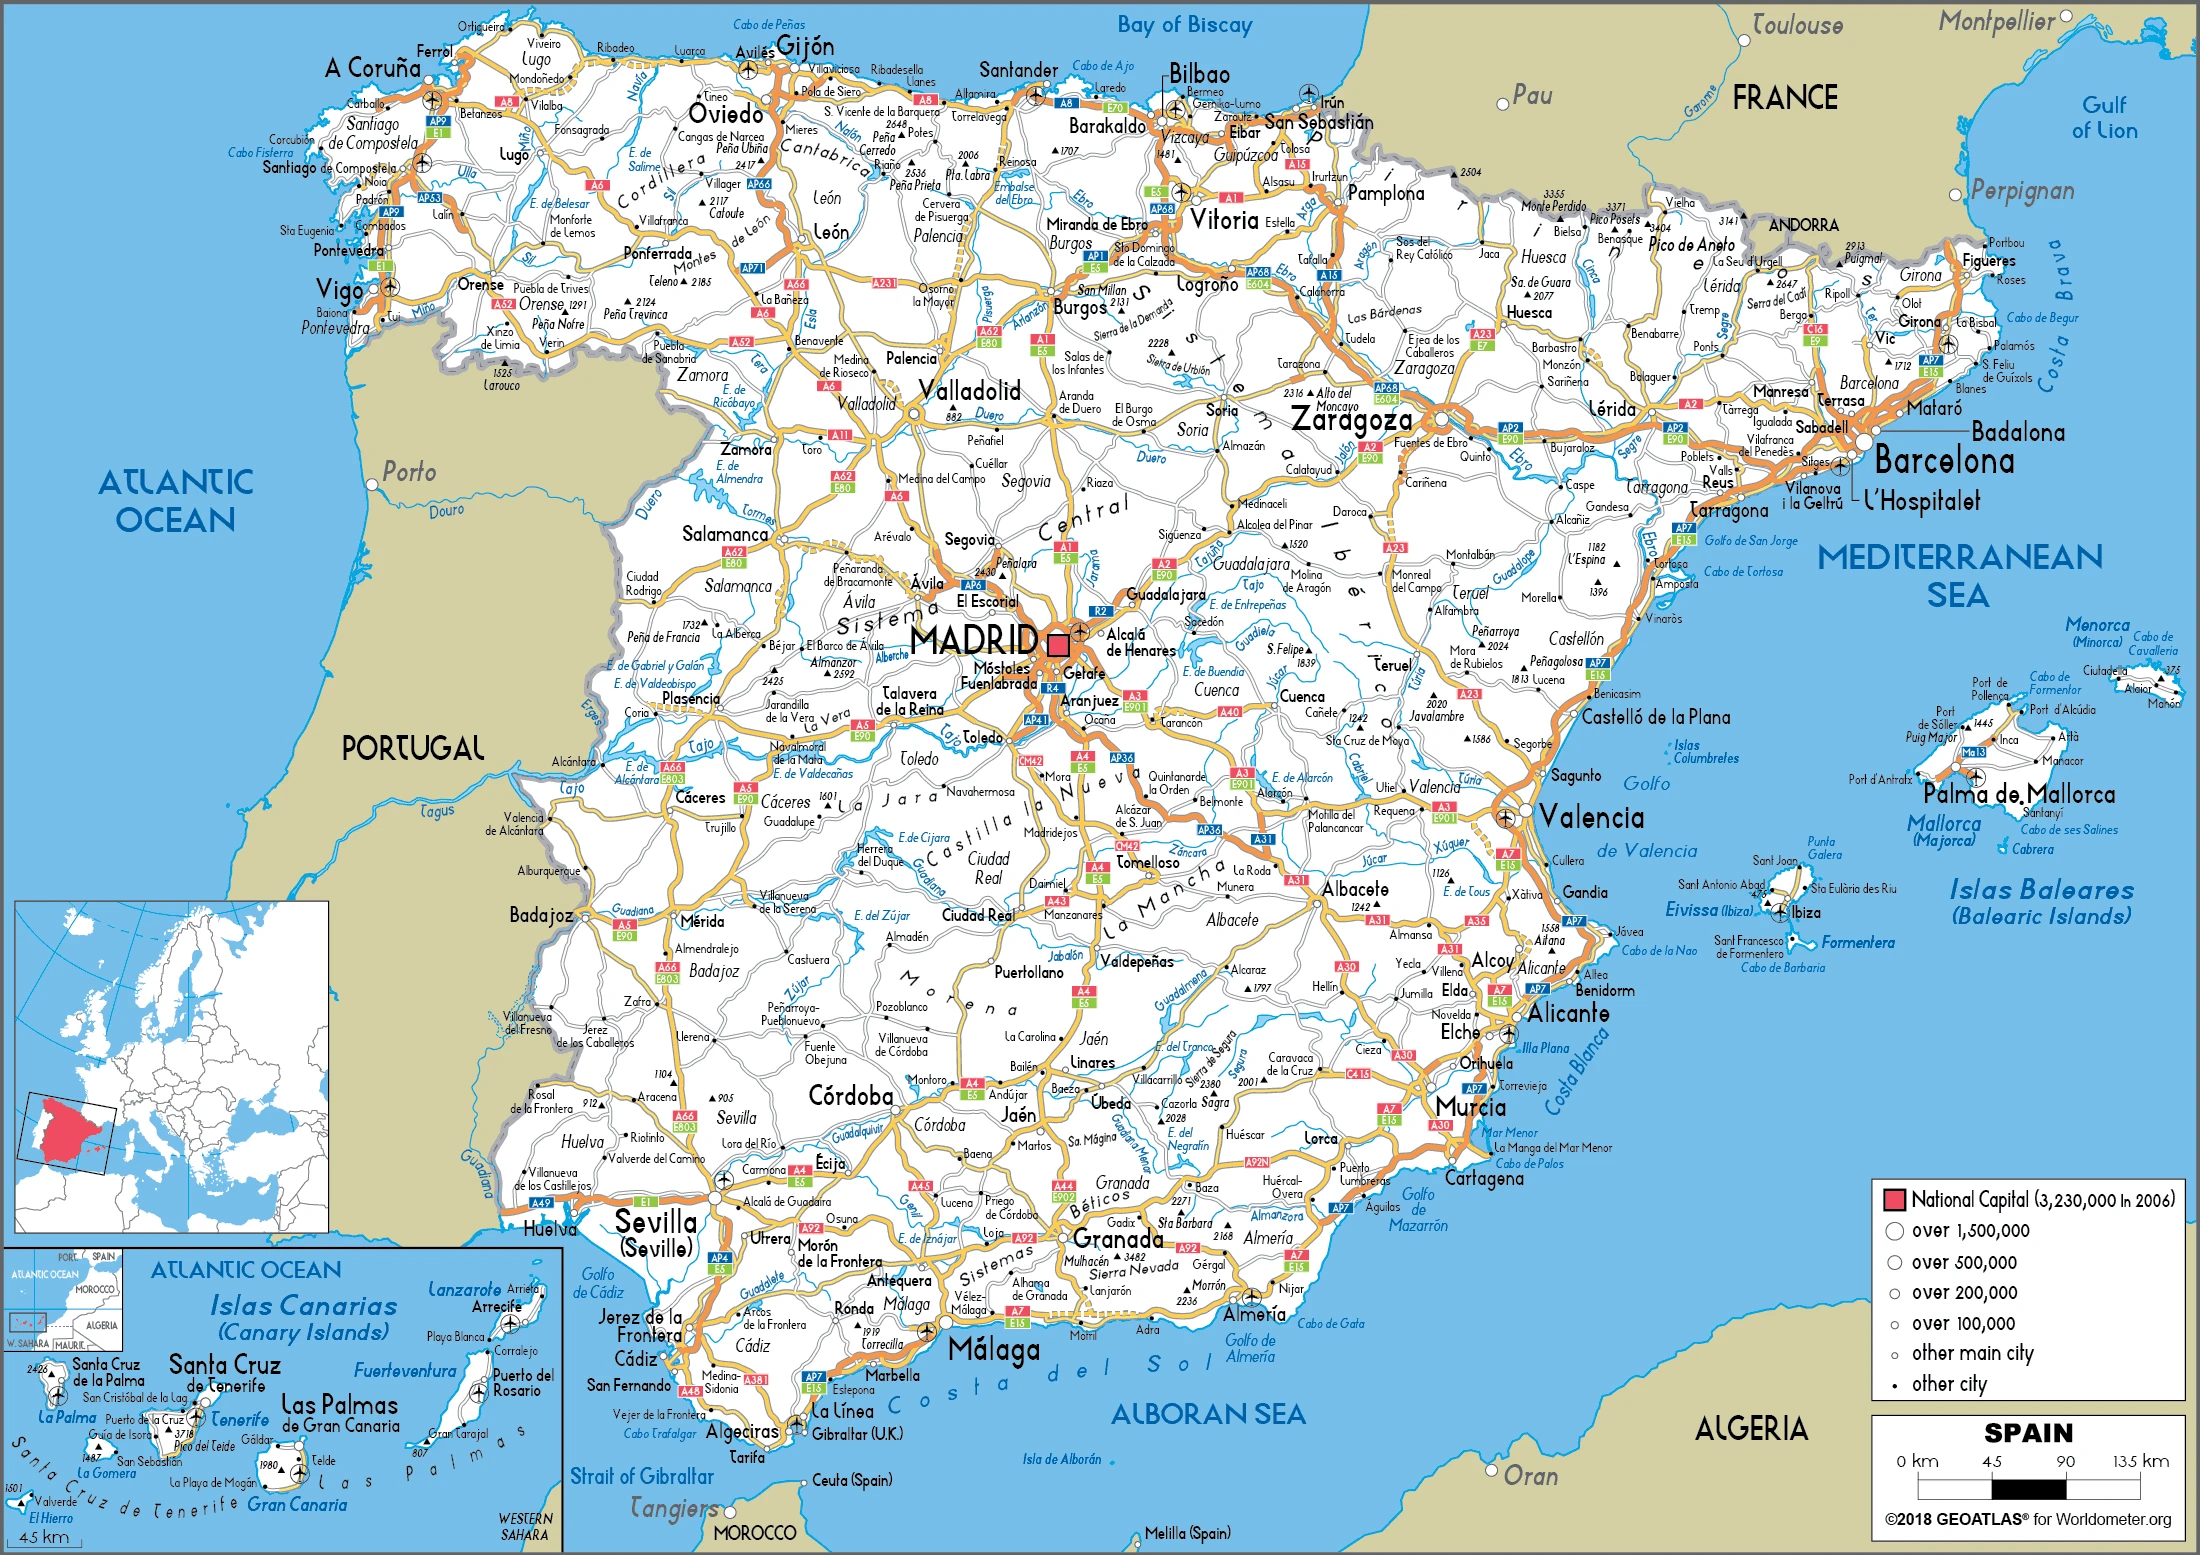 The route plan of the Spanish roadways.